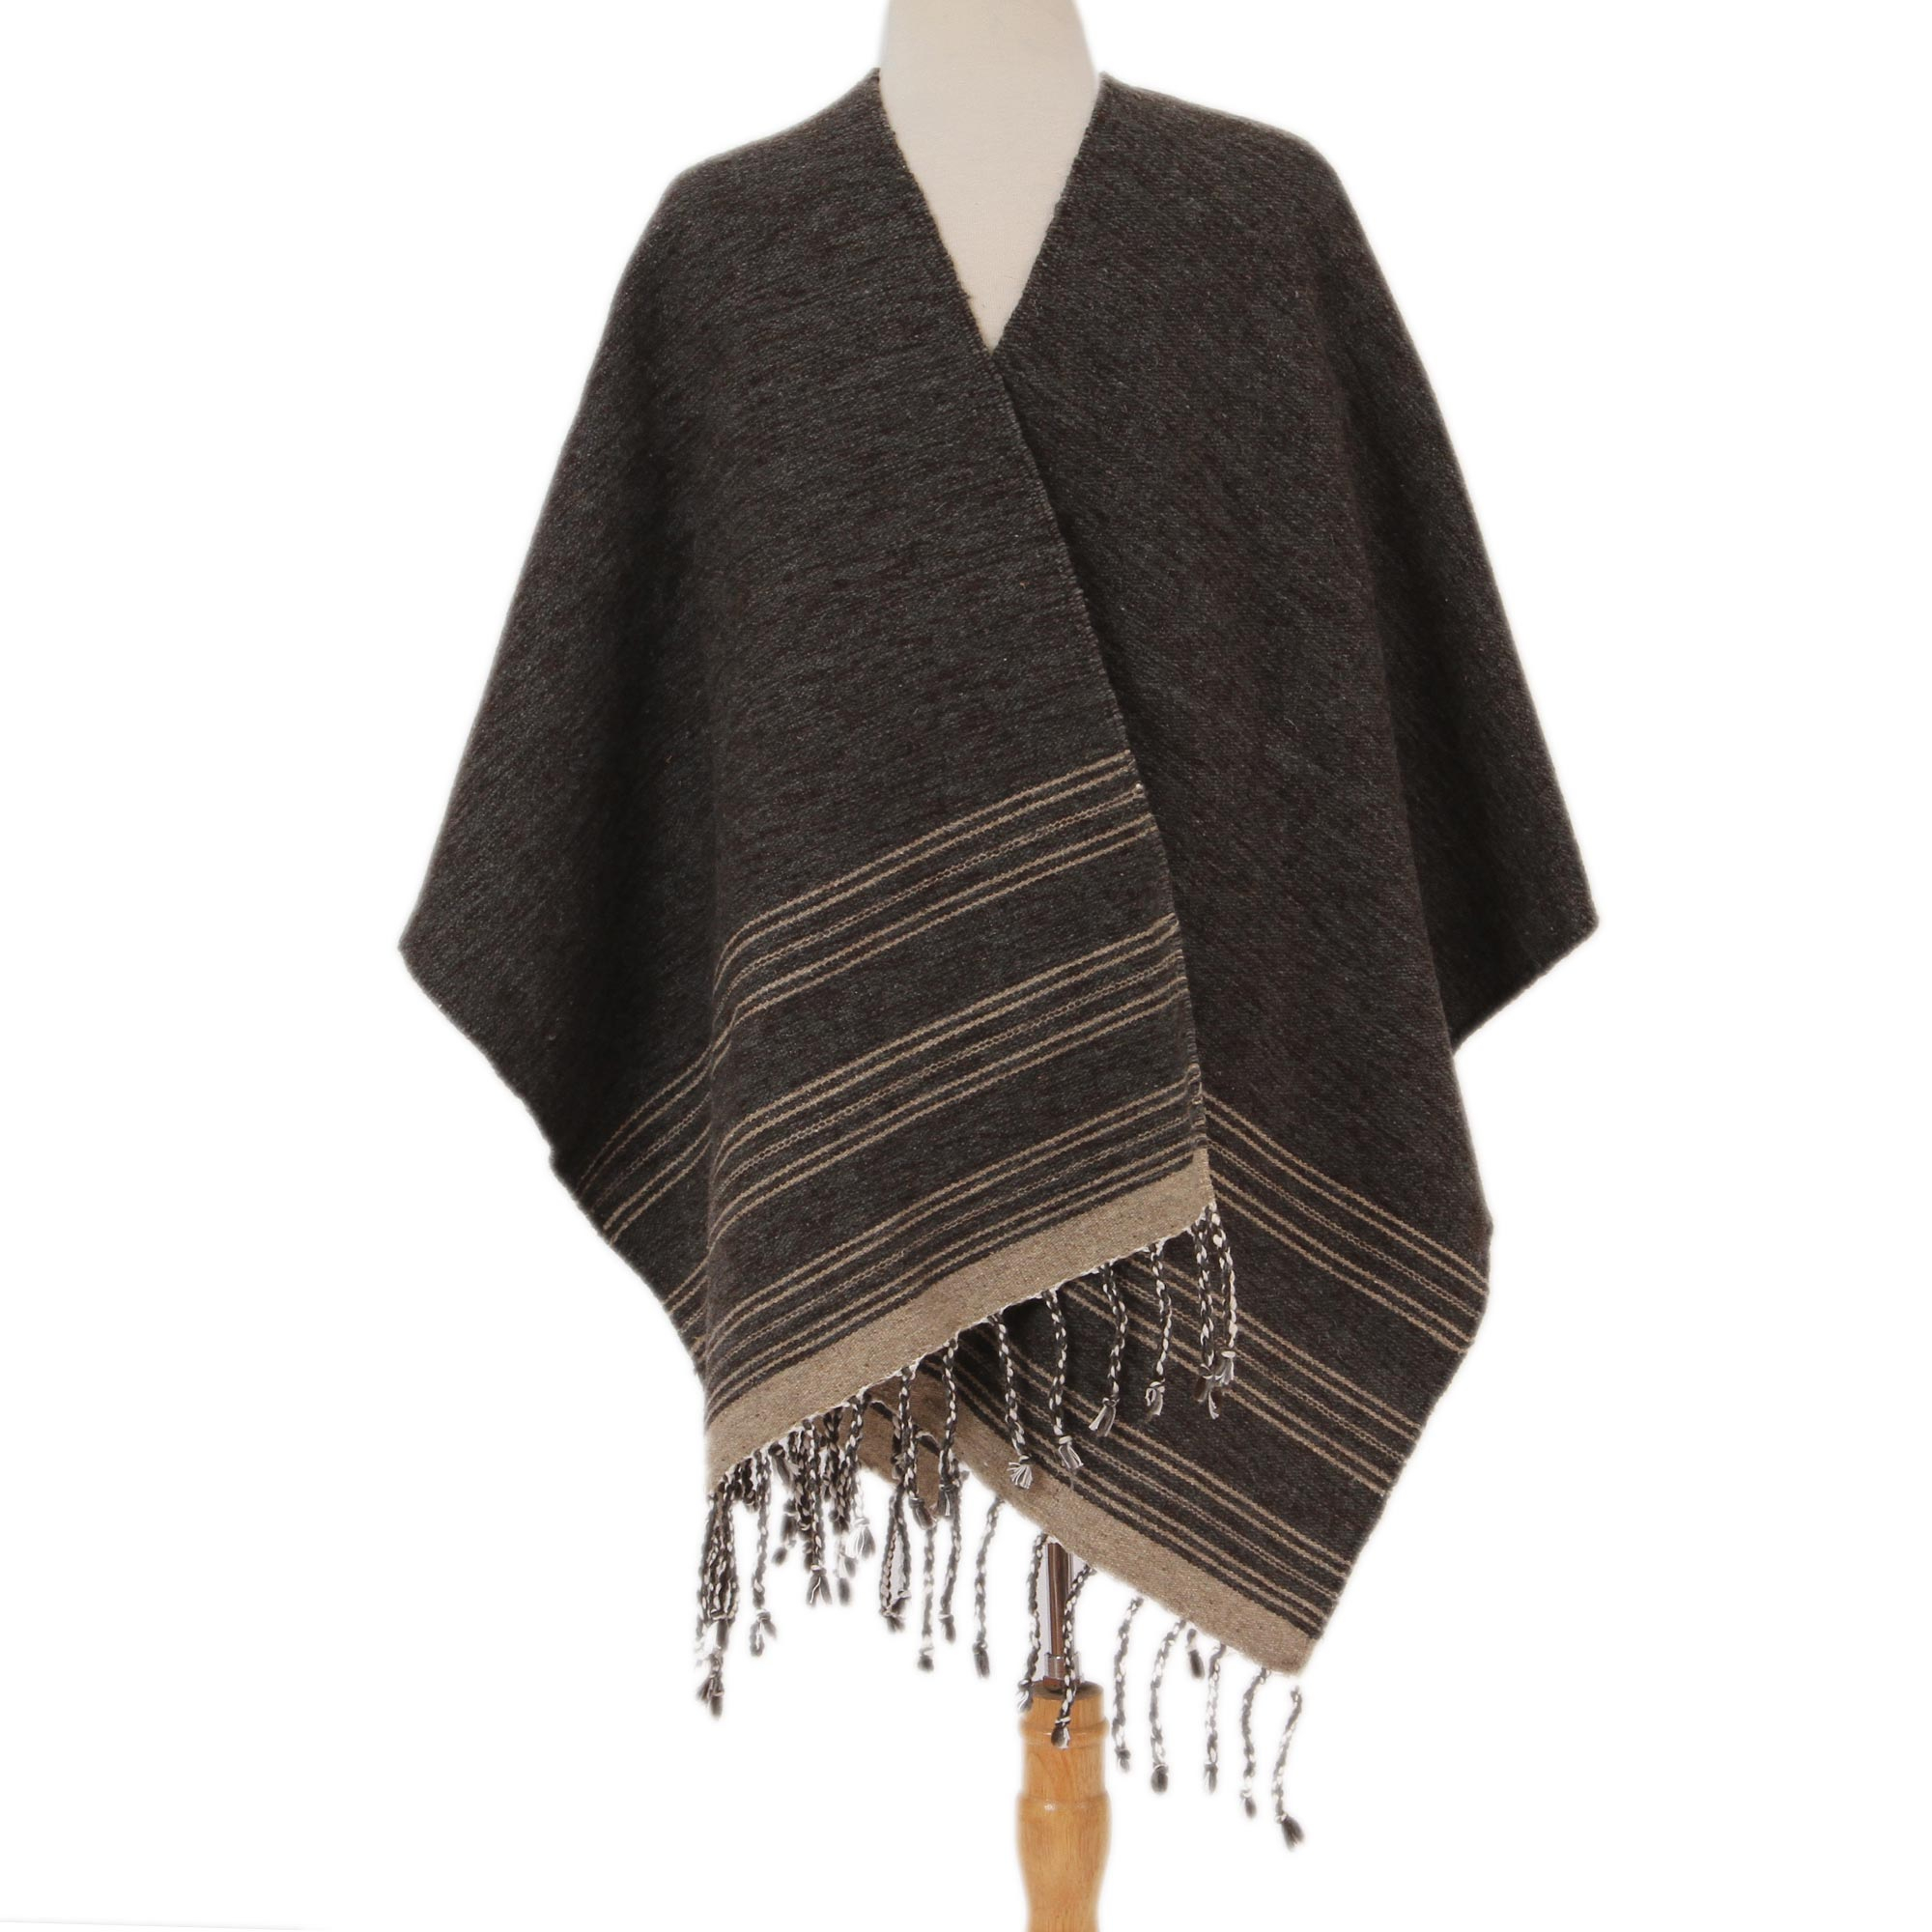 Men's Wool Blend Ruana in Grey and Beige from Mexico - Flint and Sand ...